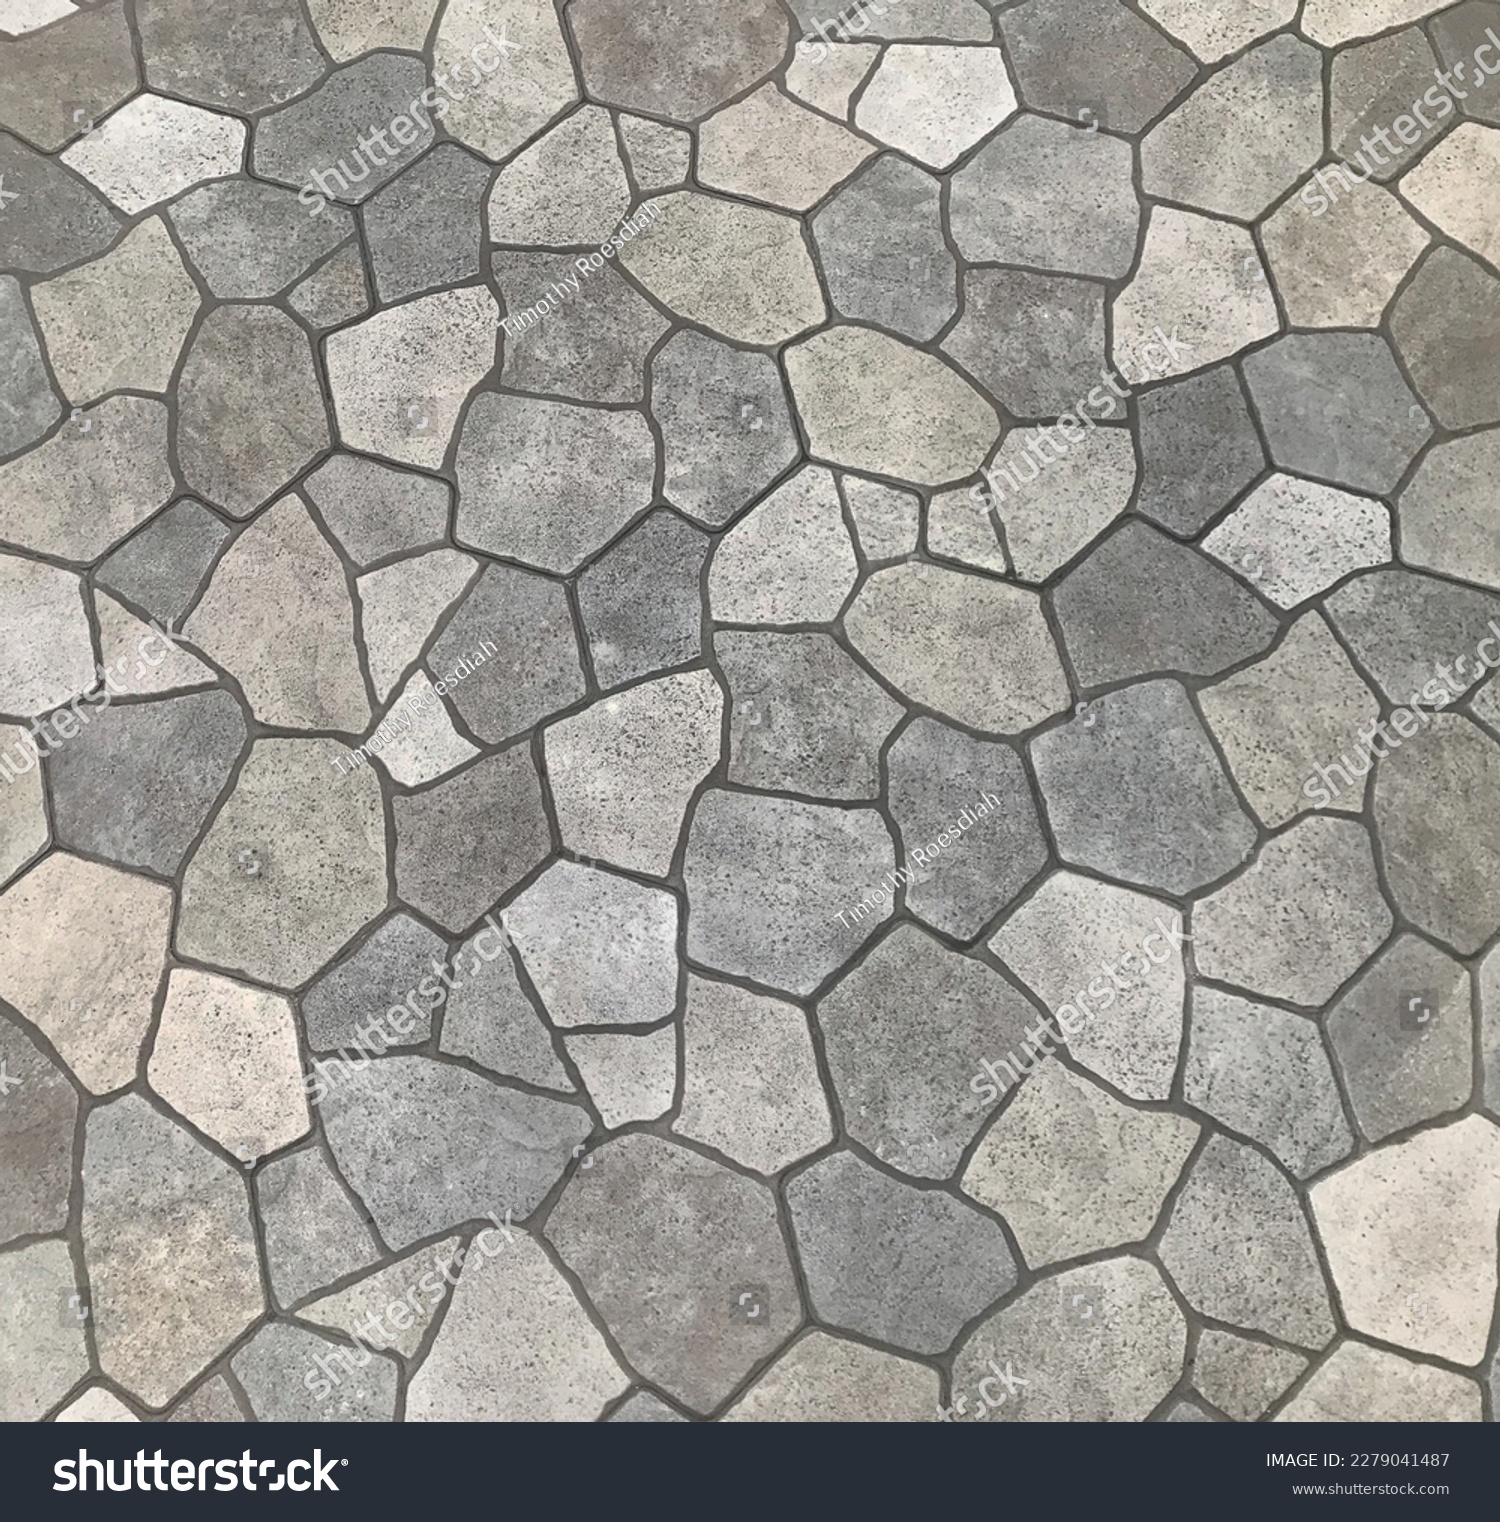 Seamless flagstone outdoor paving textures, cobblestone cut flat in random pieces, grey, light grey, beige, and charcoal color. Monochrome. Pavement surface texture. Landscape paving stone background #2279041487